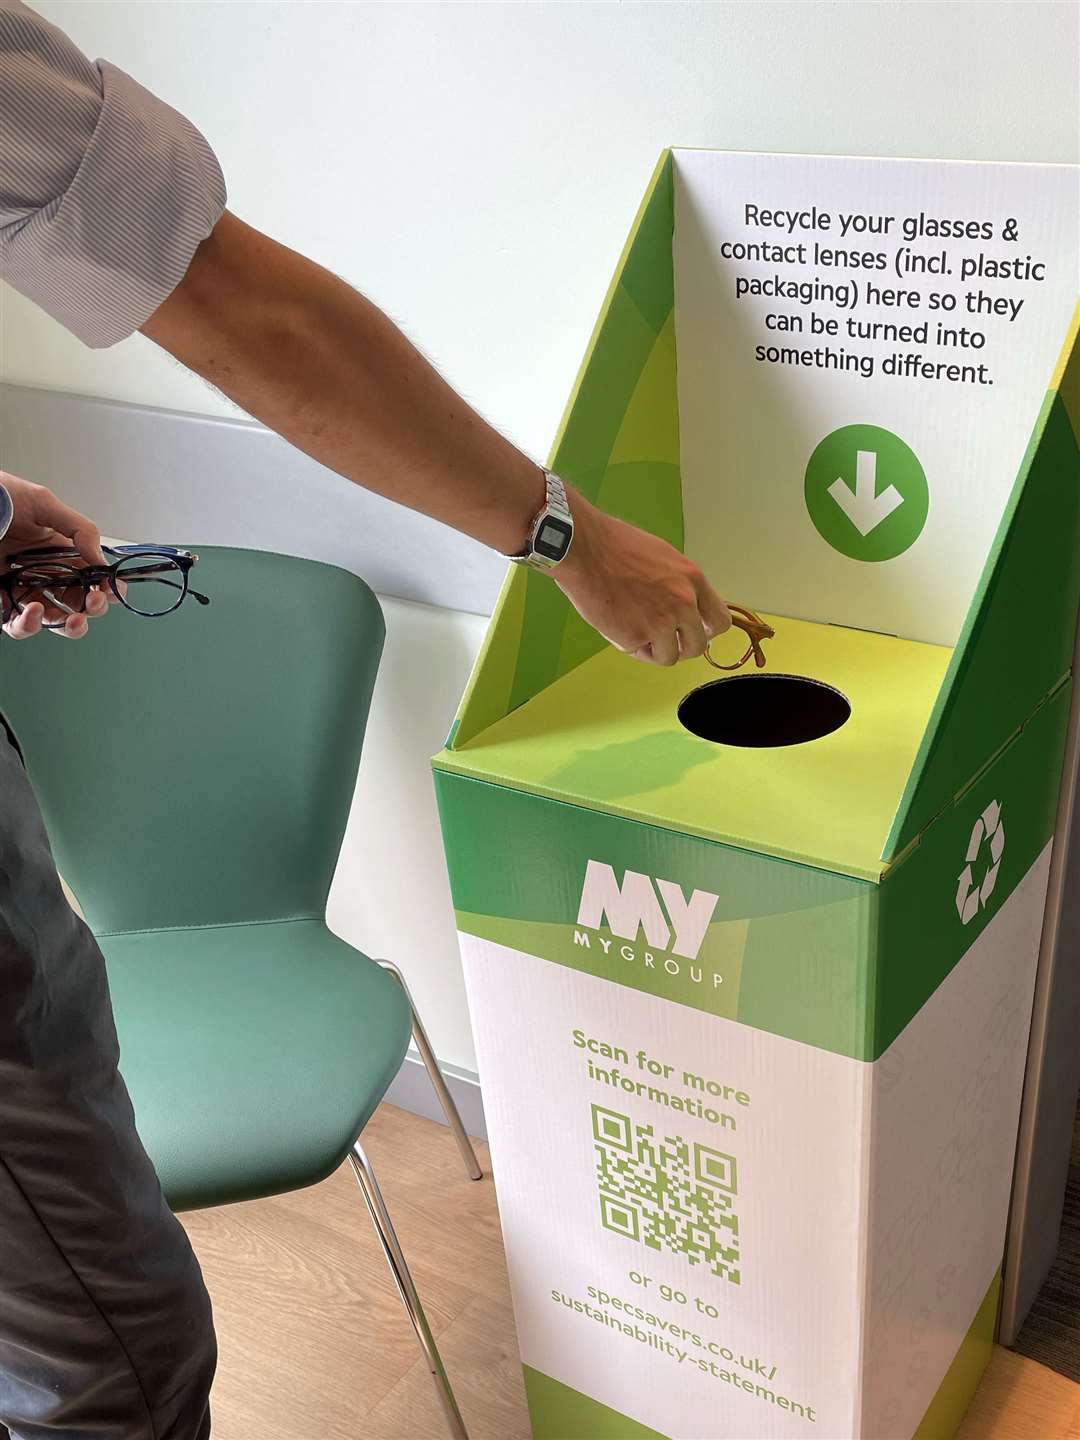 Glasses and contact lenses can now be recycled in the Nairn Specsavers store.